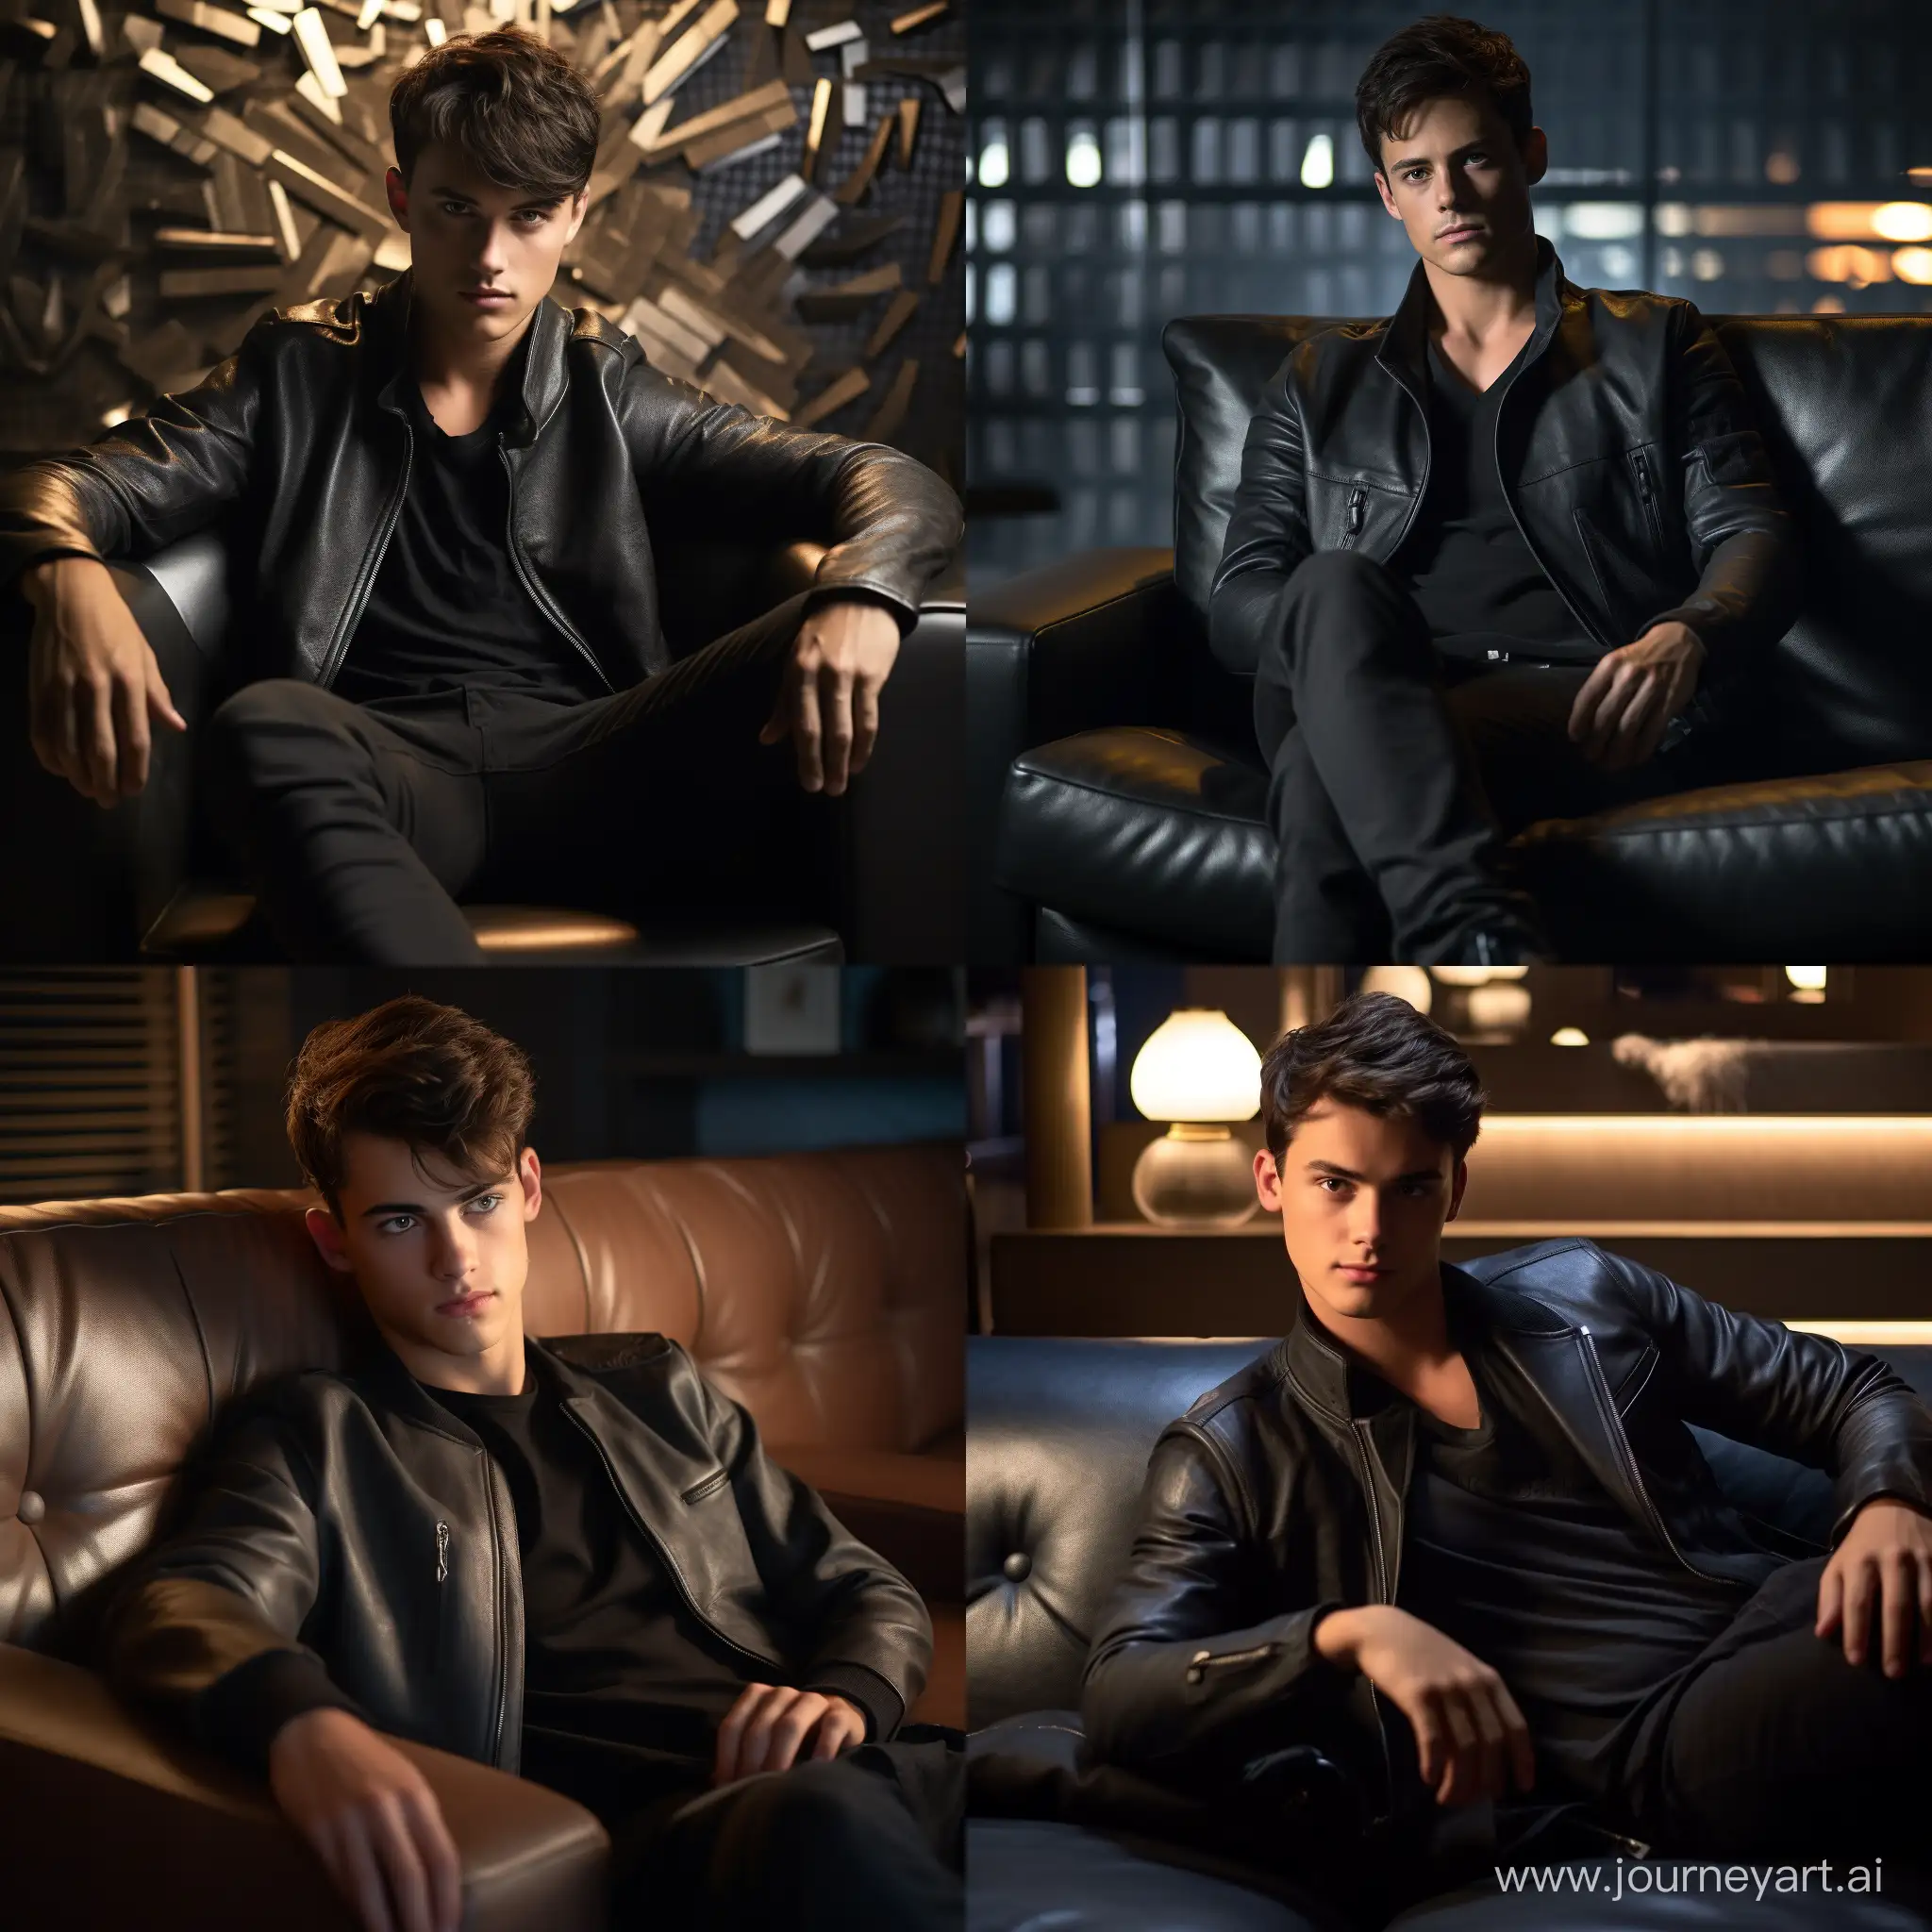 A sophisticated, realistic 4k cinematic photo,young adult, Not a mature 17 years old. European appearance with classical medium length darkbrown haircut. He's wearing clothes with  Armani Exchange logo clothes. He is sitting on leather sofa, his focused demeanor enhanced by the soft glow of the screen in the room's understated lighting. The setting boasts a luxurious modern design with expensive furniture and book-lined shelves in the background that suggest depth and texture. In the style of 35mm film 